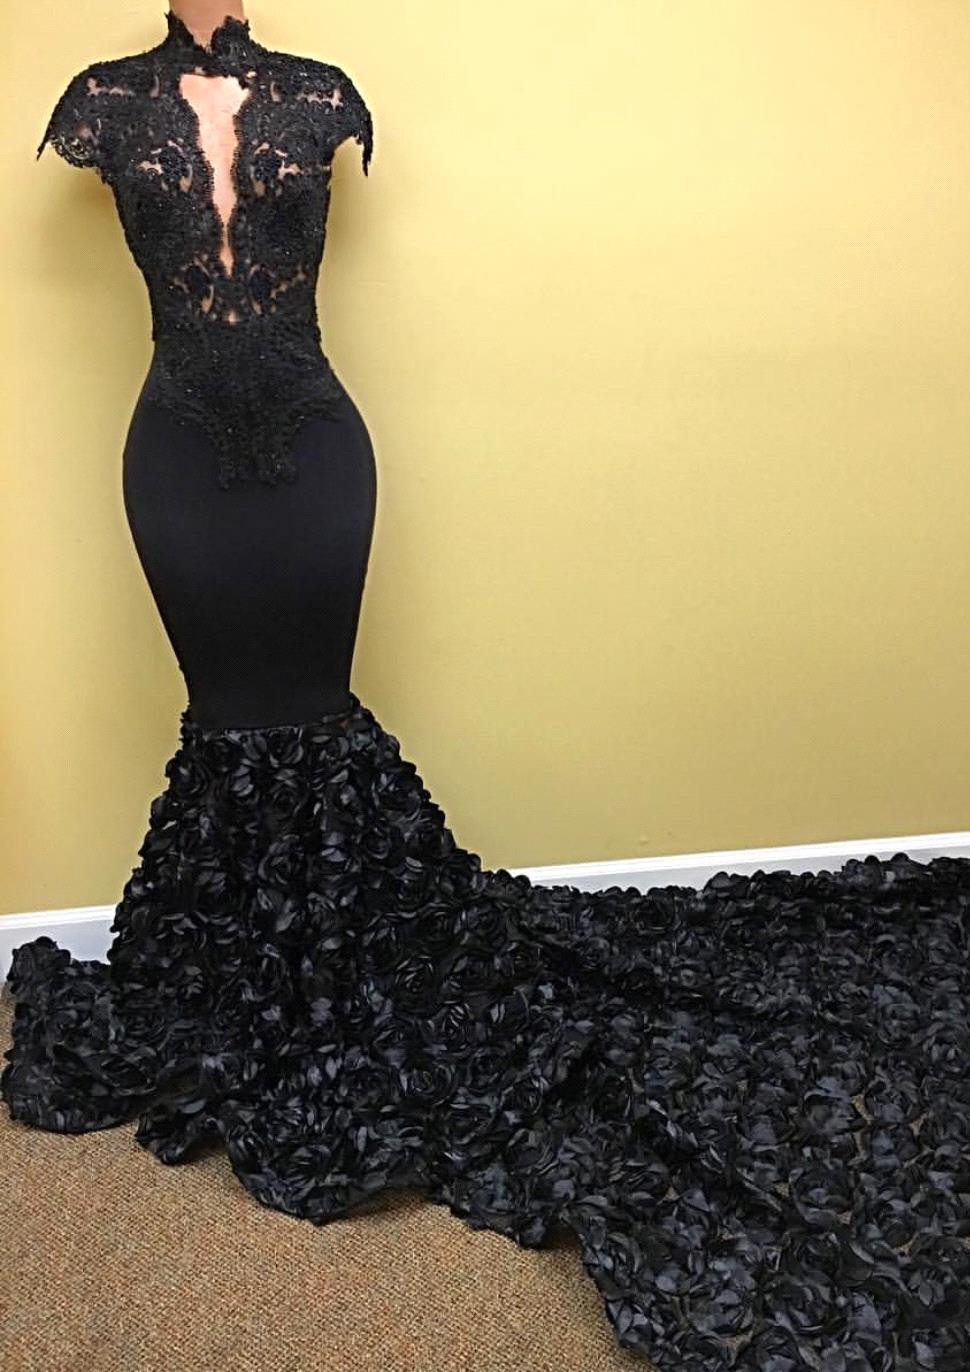 Black Dress With Flowers On Bottom ...